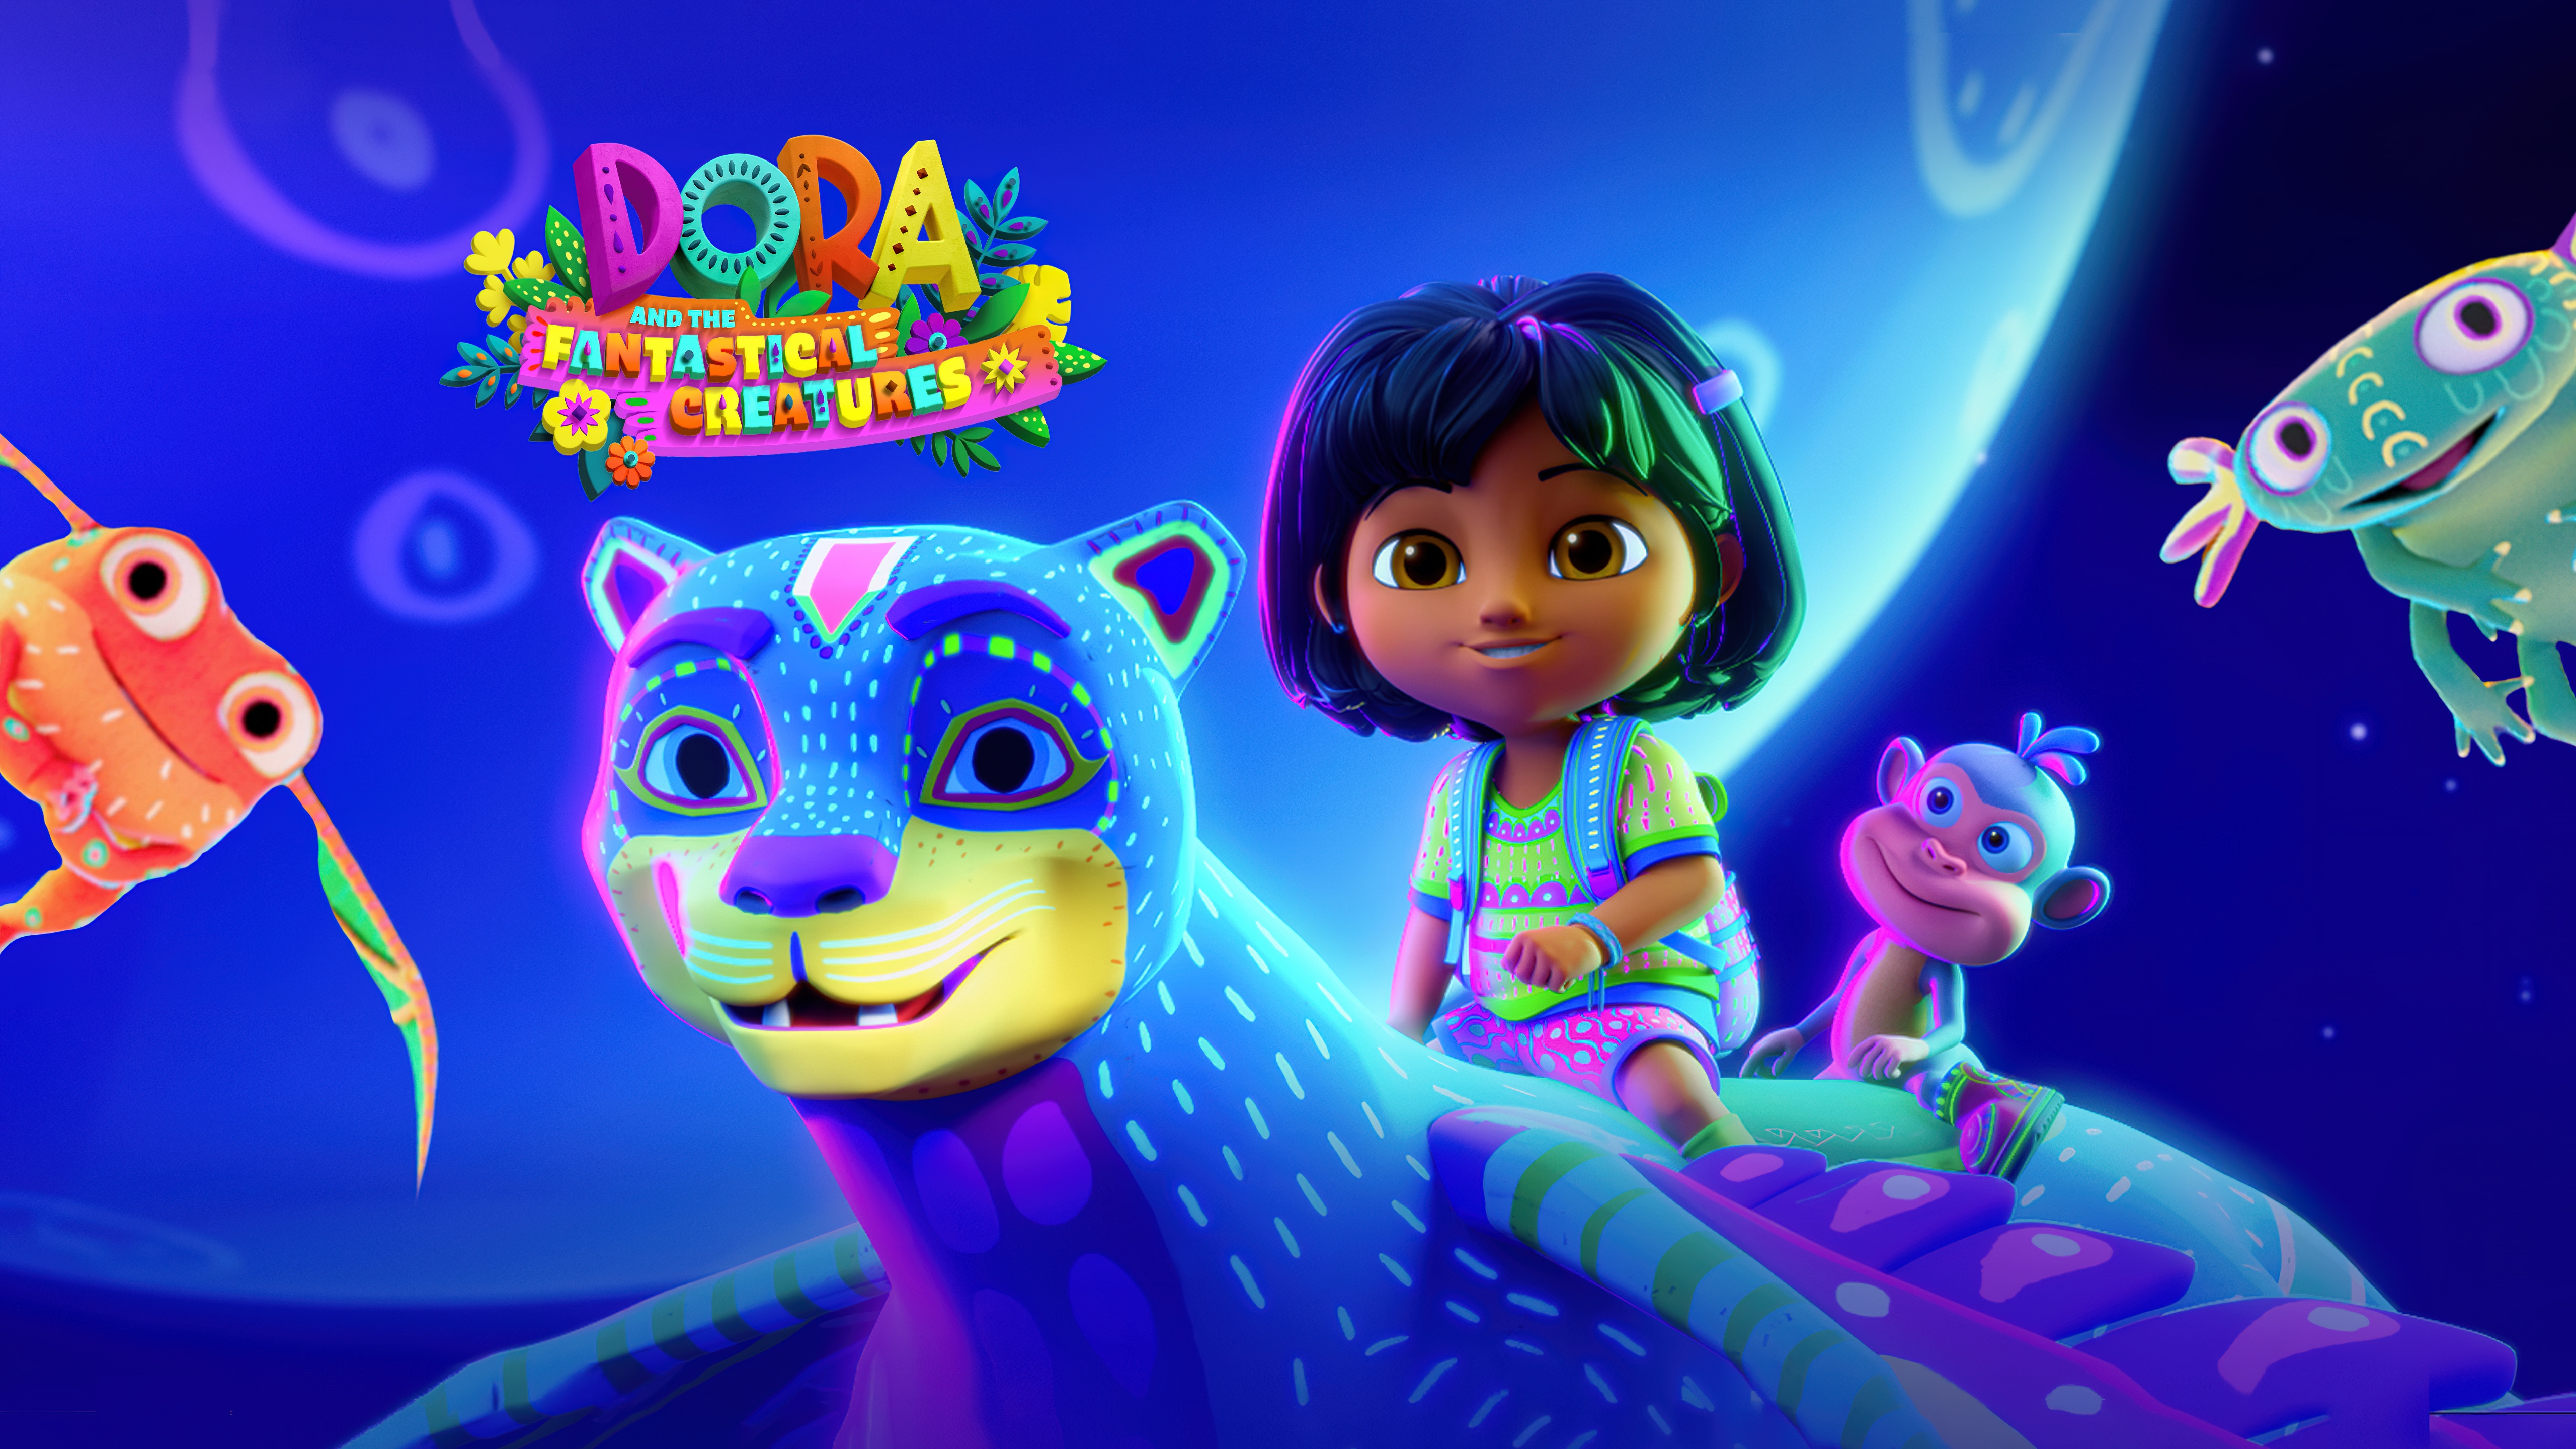 HD wallpaper, Animation, 5K, Dora And The Fantastical Creatures